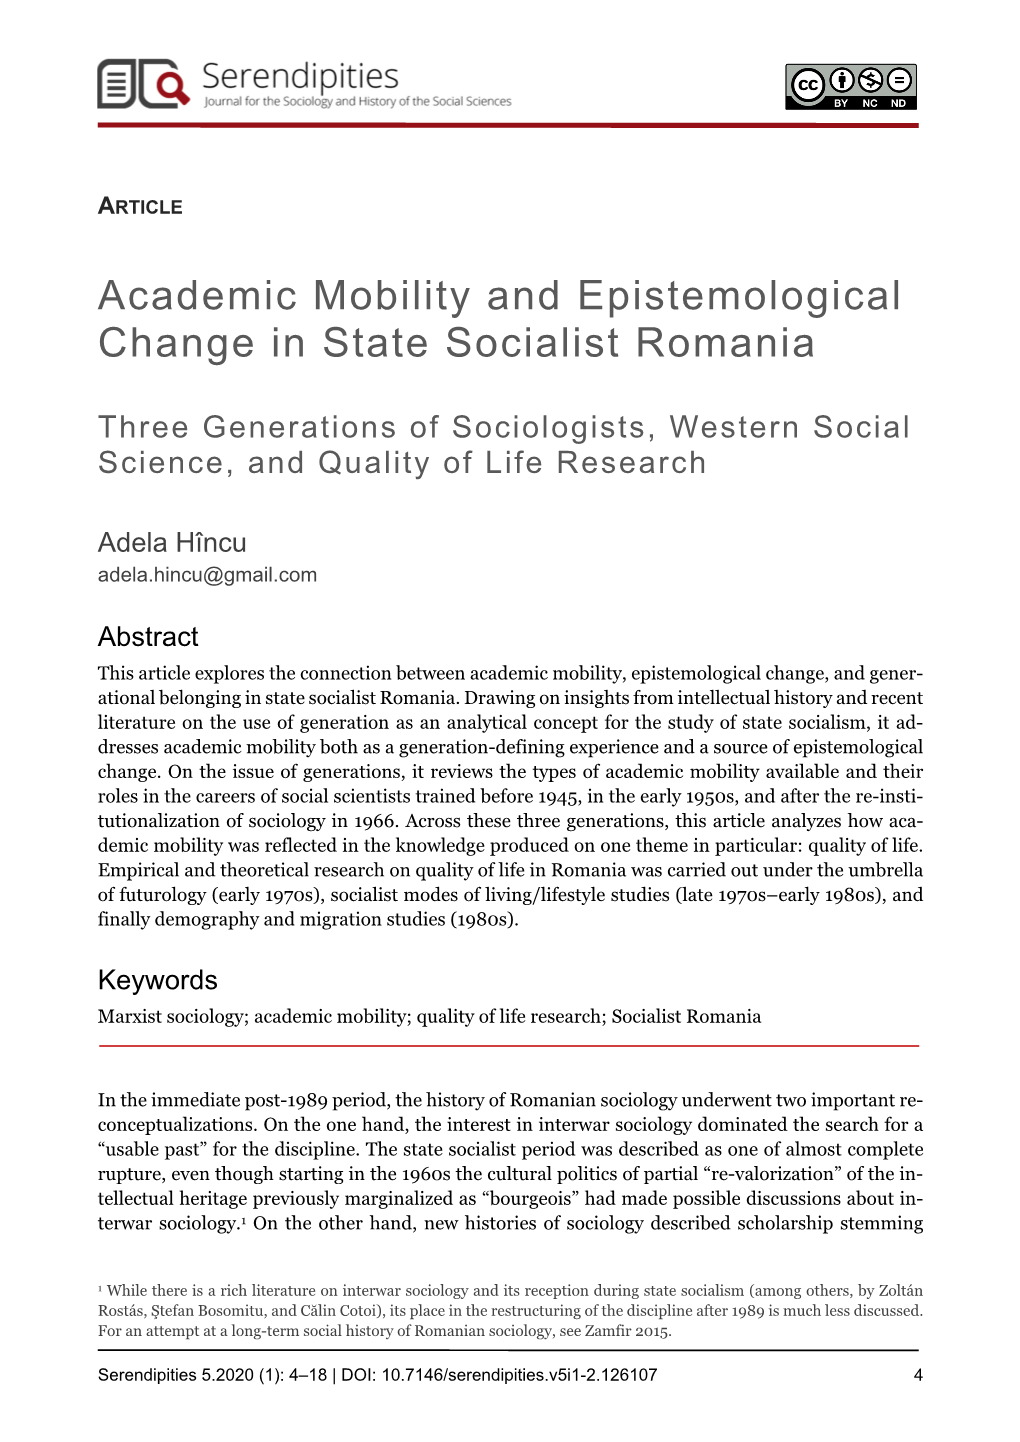 Academic Mobility and Epistemological Change in State Socialist Romania